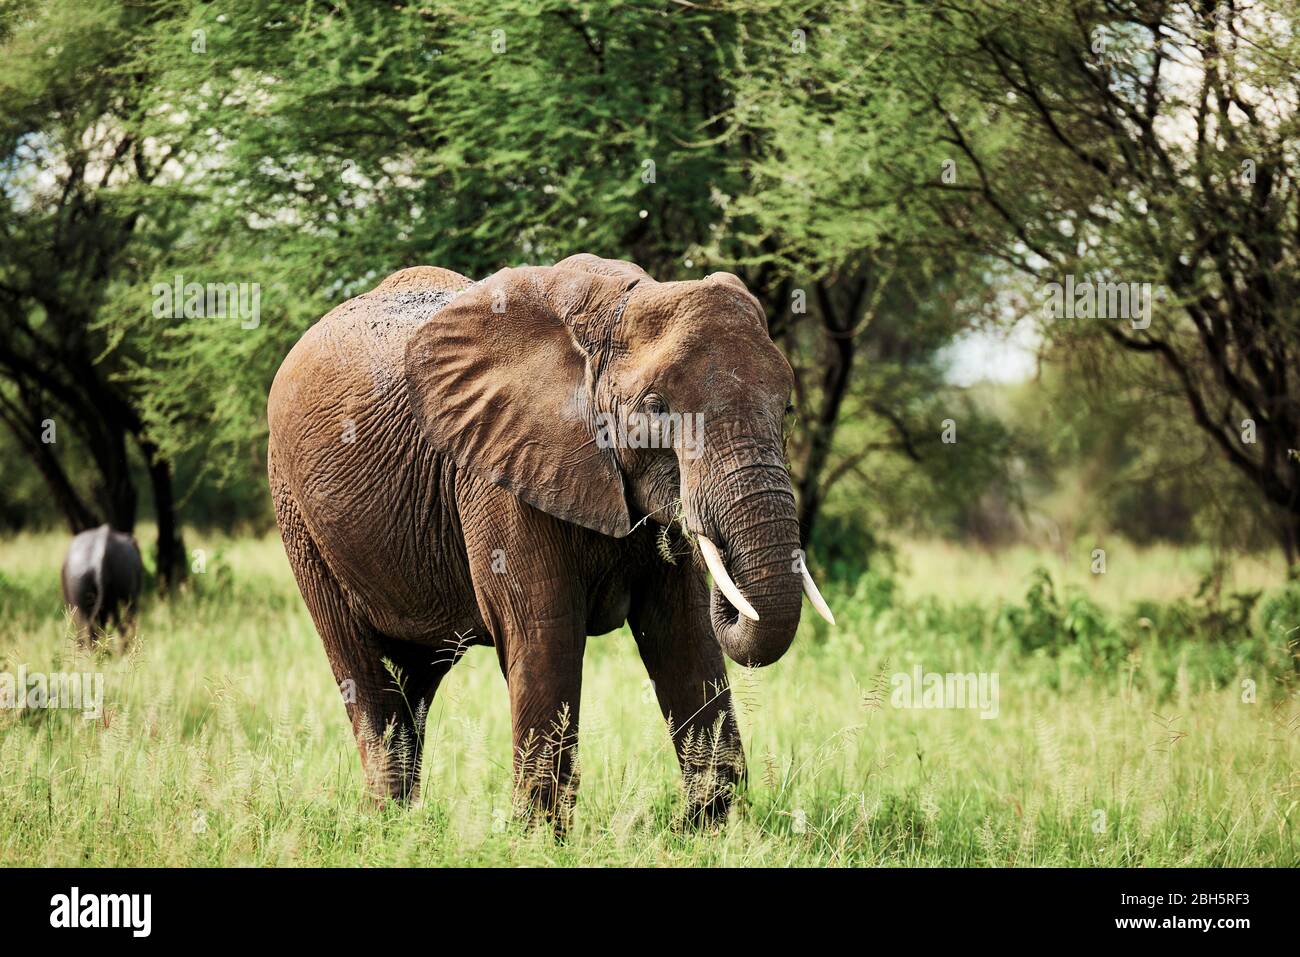 African elephant in National Park of Tanzania Stock Photo